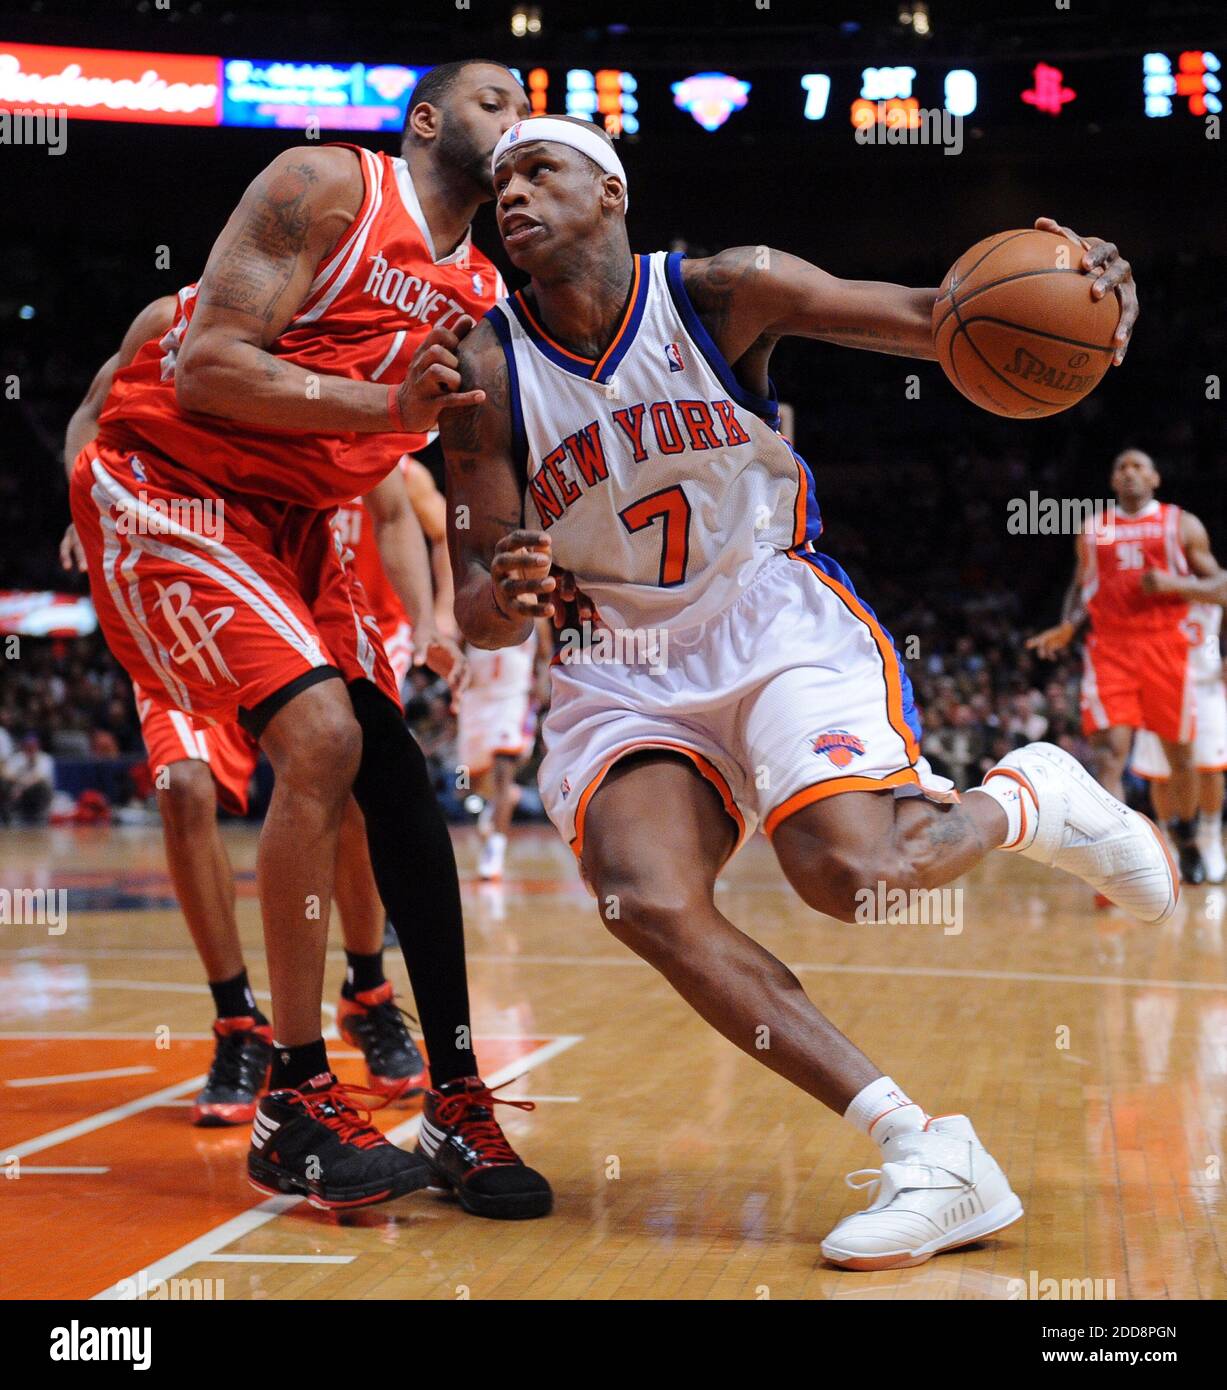 Tracy McGrady collects 26 points in debut, but Knicks still fall to  Thunder, 121-118, in OT – New York Daily News